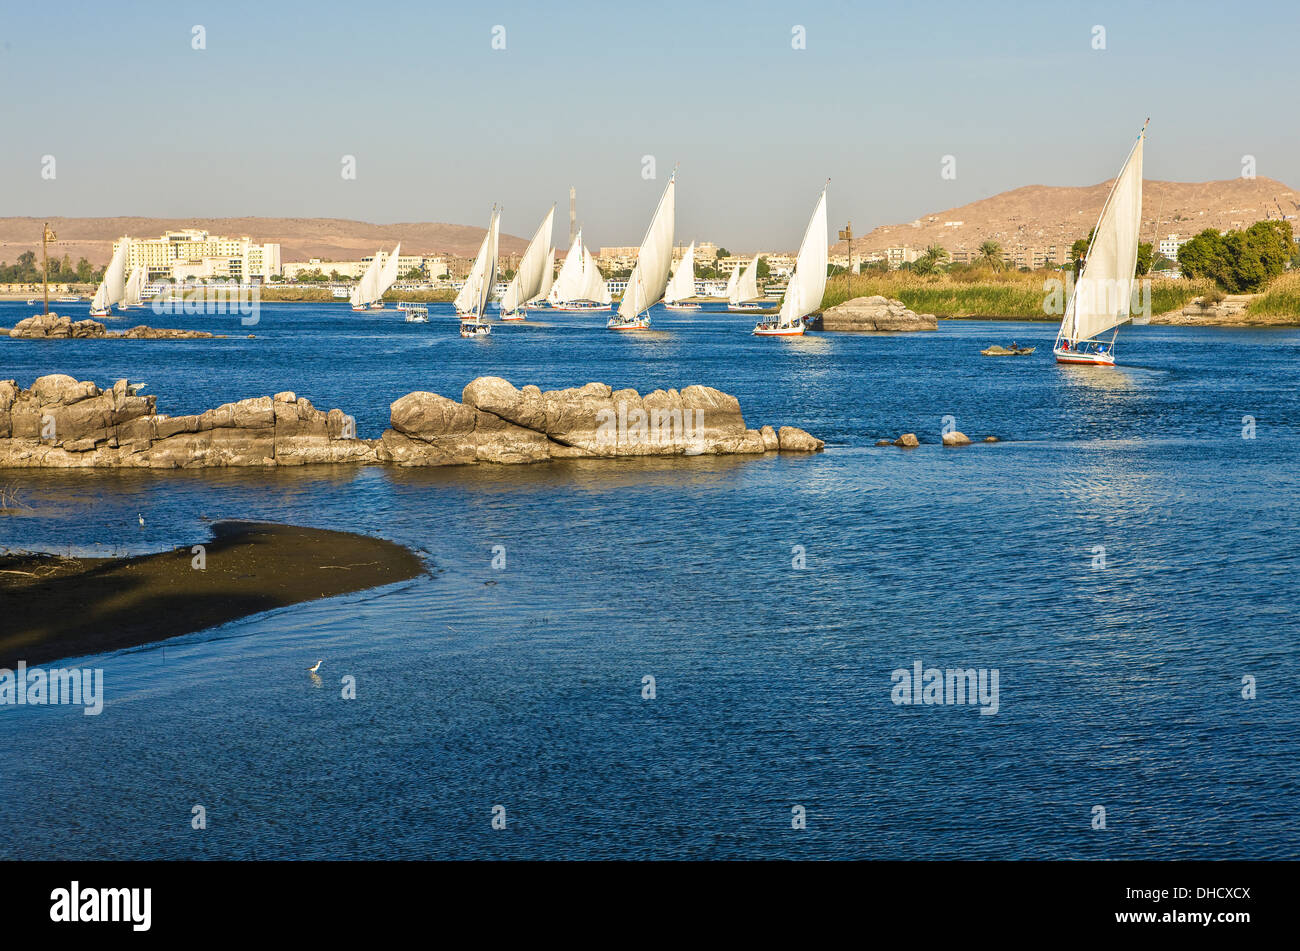 What does Egypt use the Nile river for?